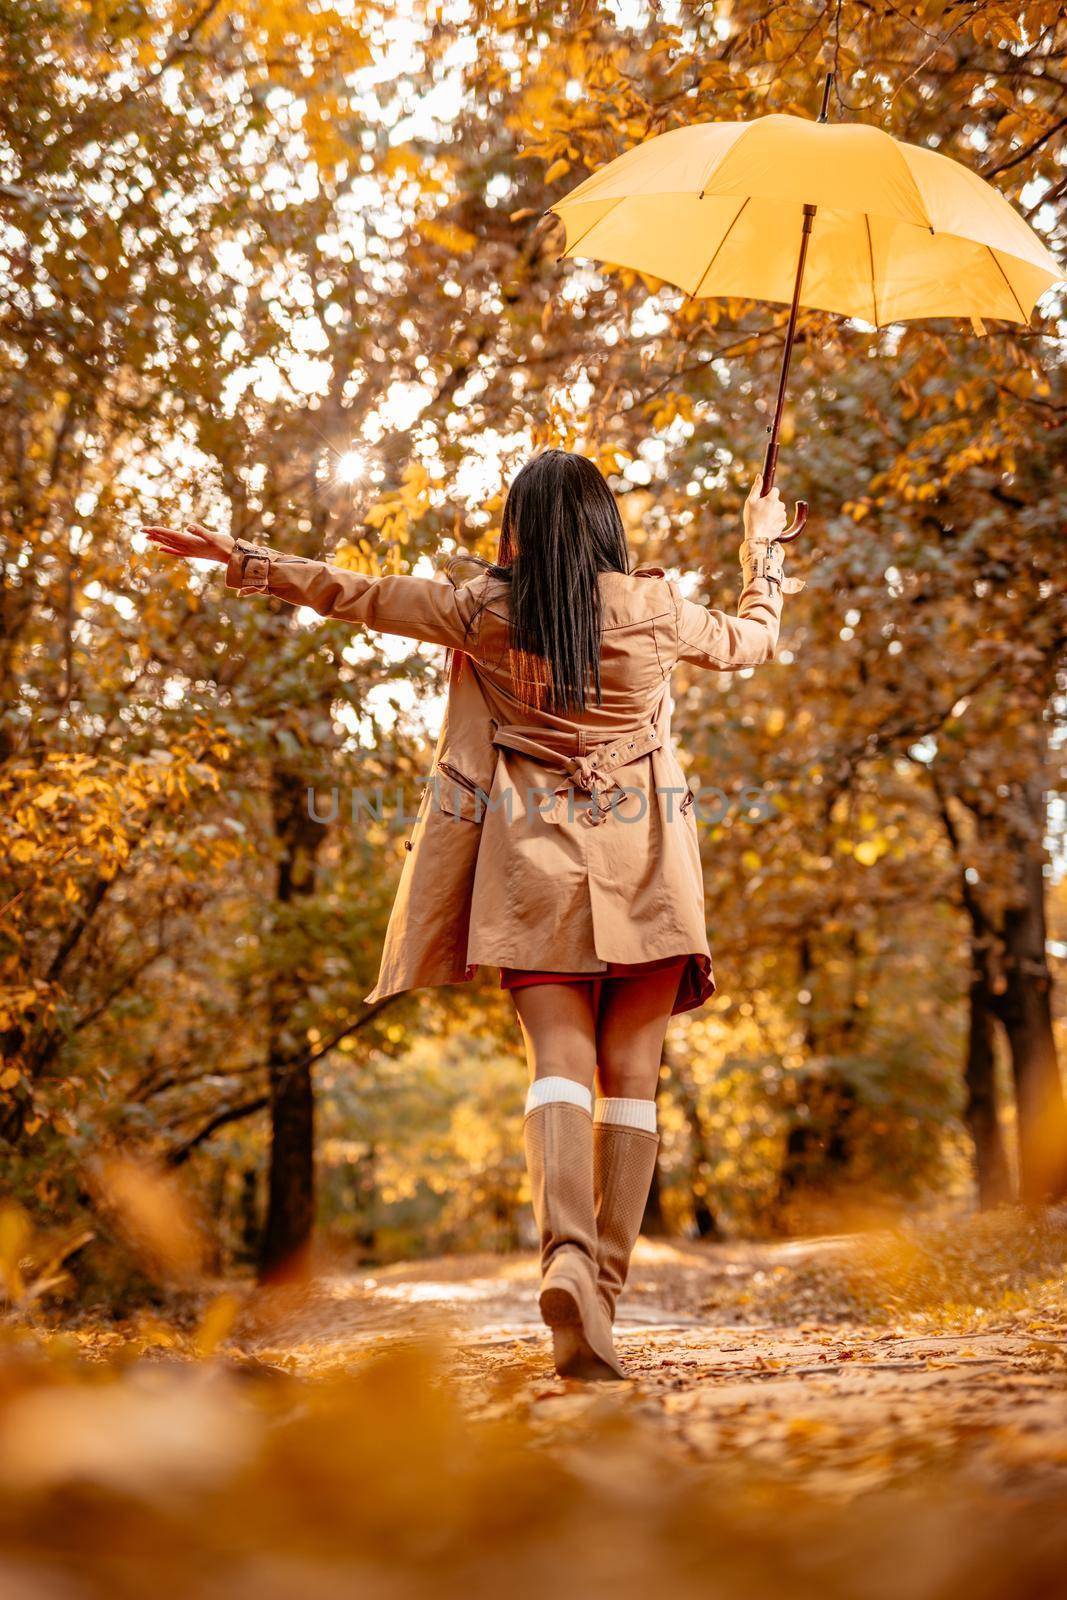 Cheerful young beautiful woman going alone with yellow umbrella in the park in golden autumn. Rear view.